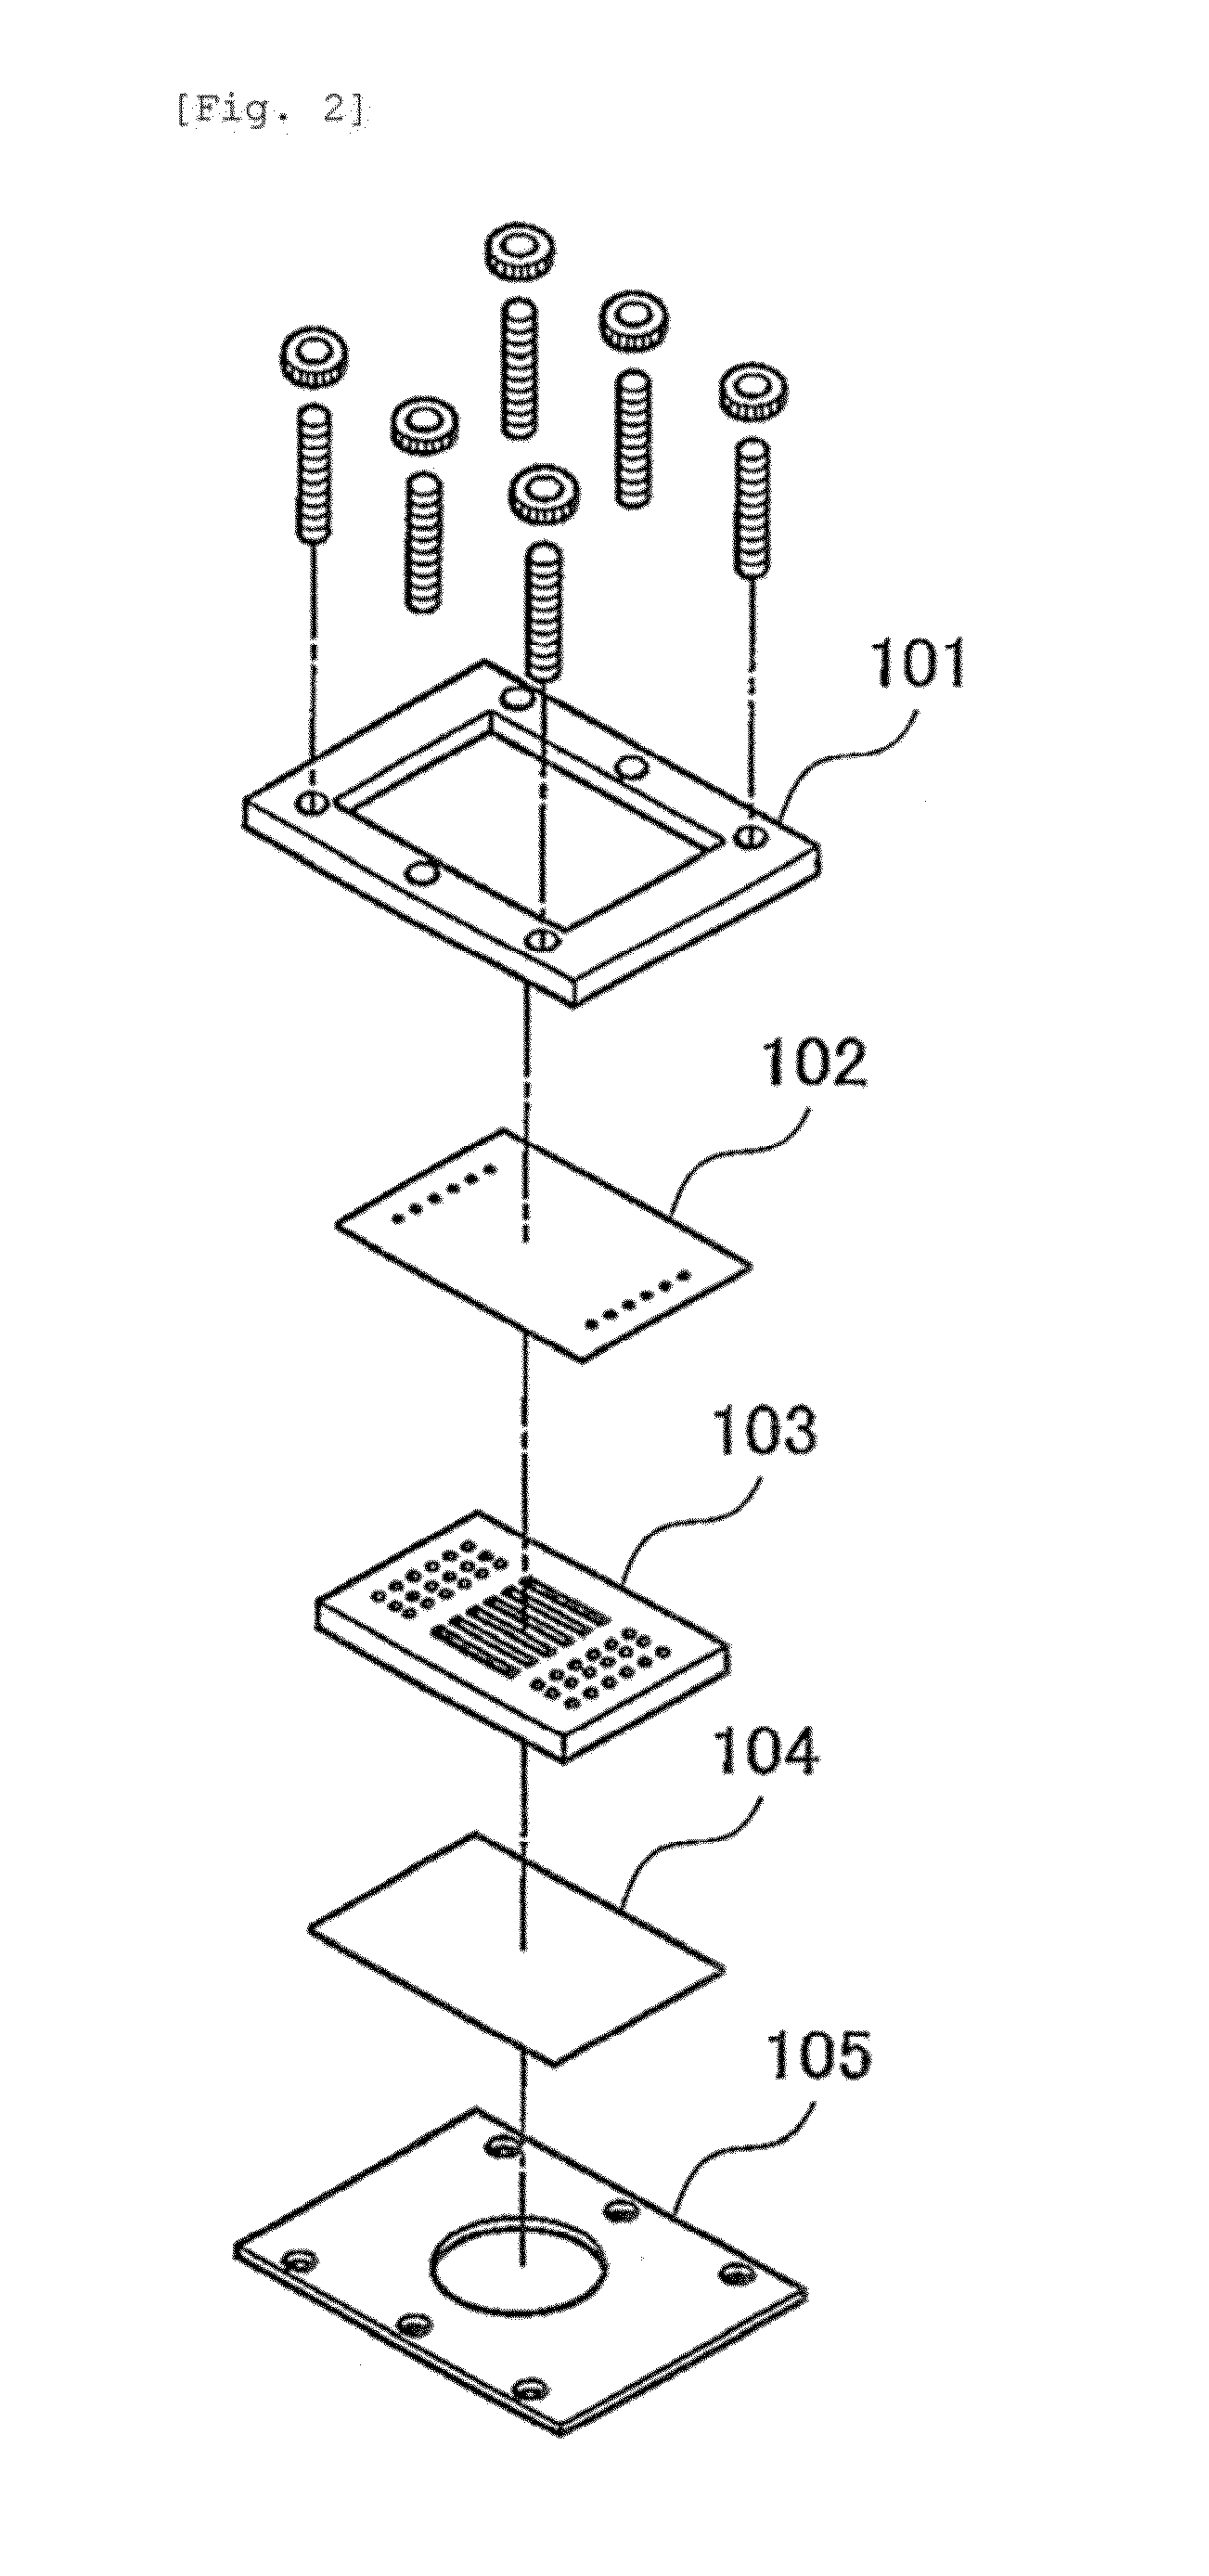 Method for culturing pluripotency-maintained singly dispersed cells by means of laminar flow